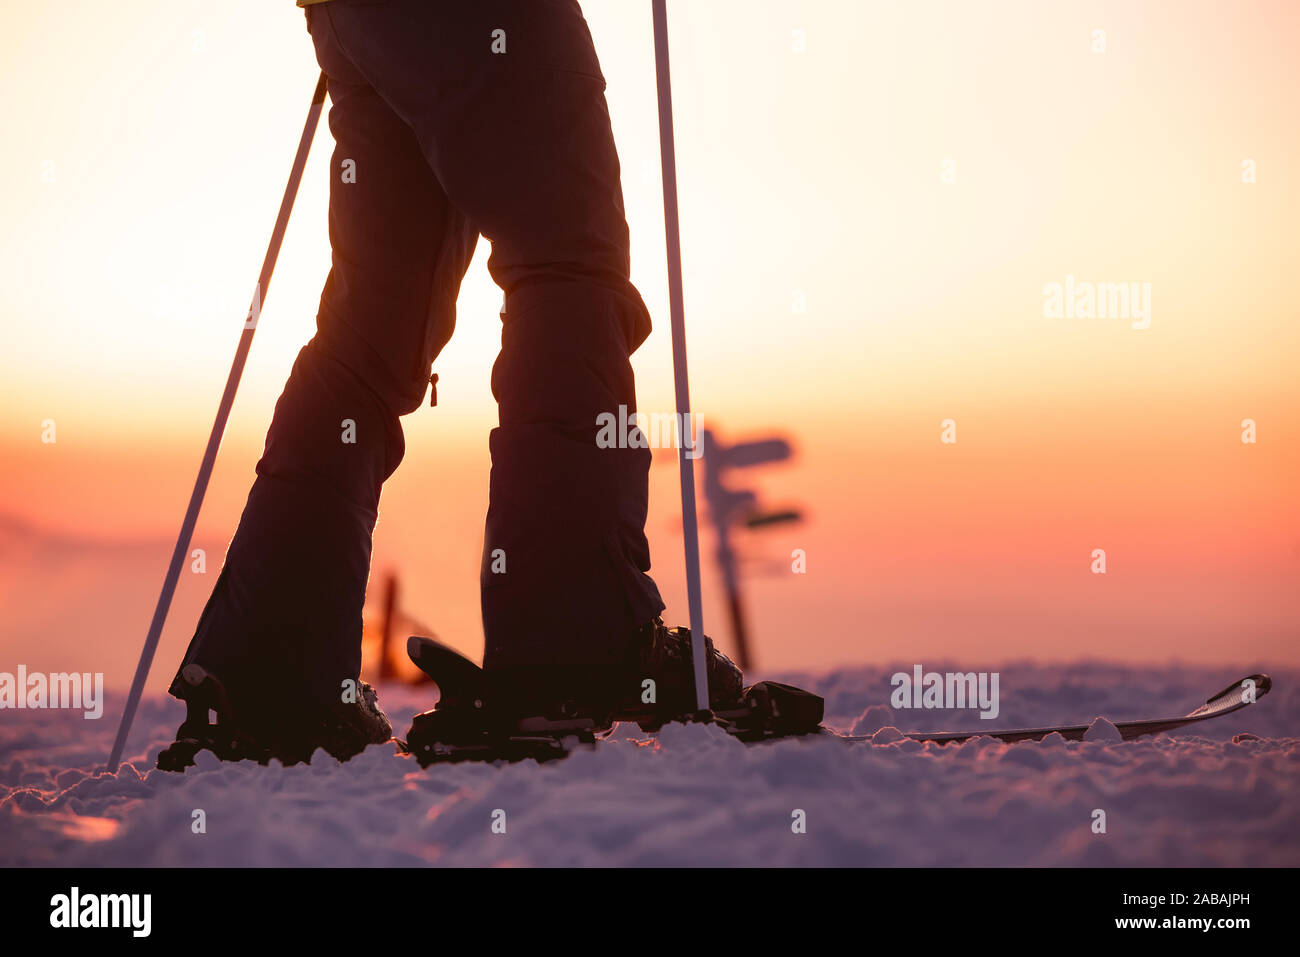 Close Up photo of female skiers legs with ski poles against sunset sky Stock Photo